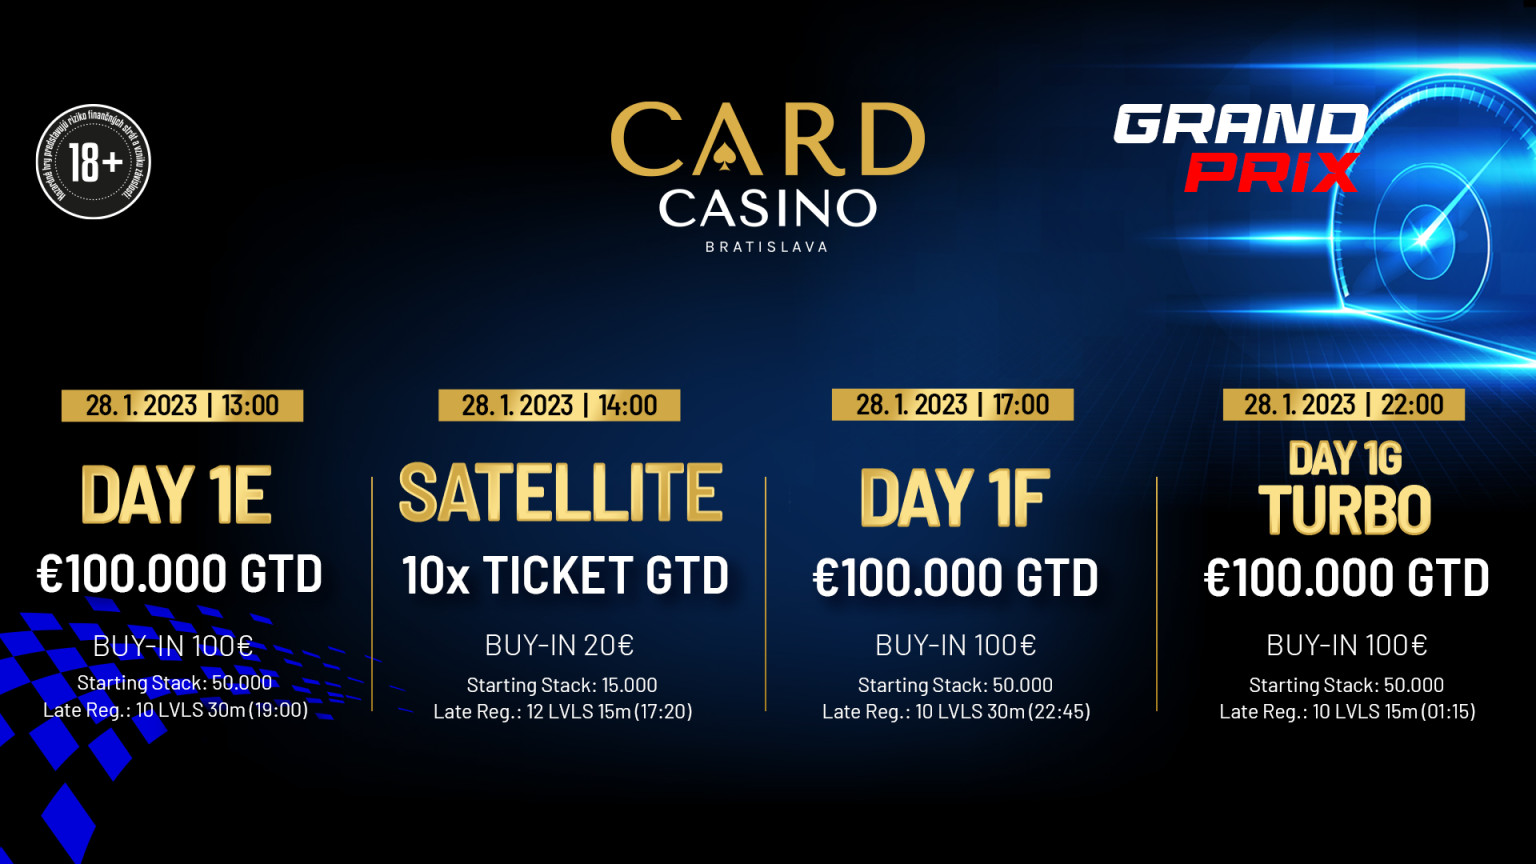 Grand Prix starts on Monday with €100,000 GTD